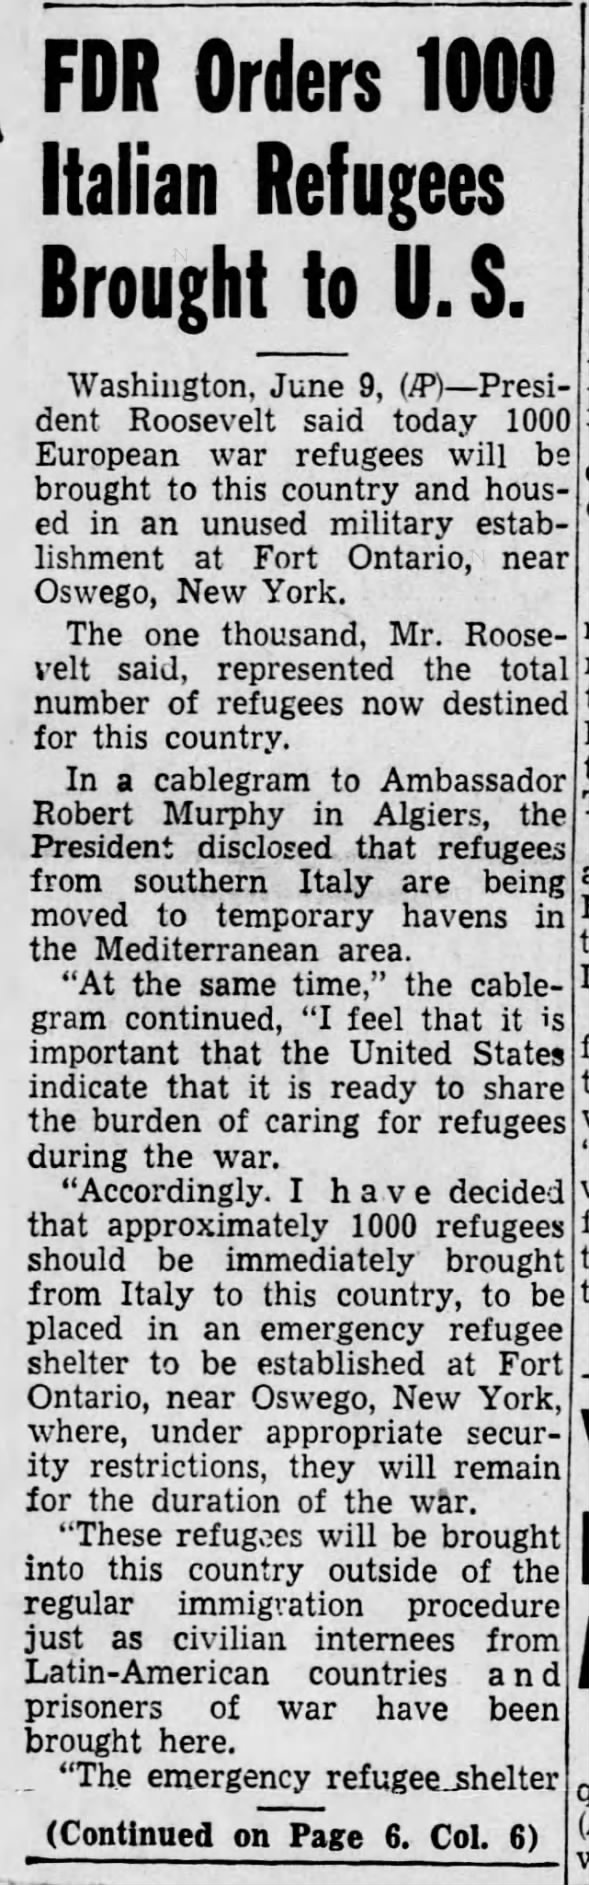 FDR Orders 1000 Italian Refugees Brought to U.S